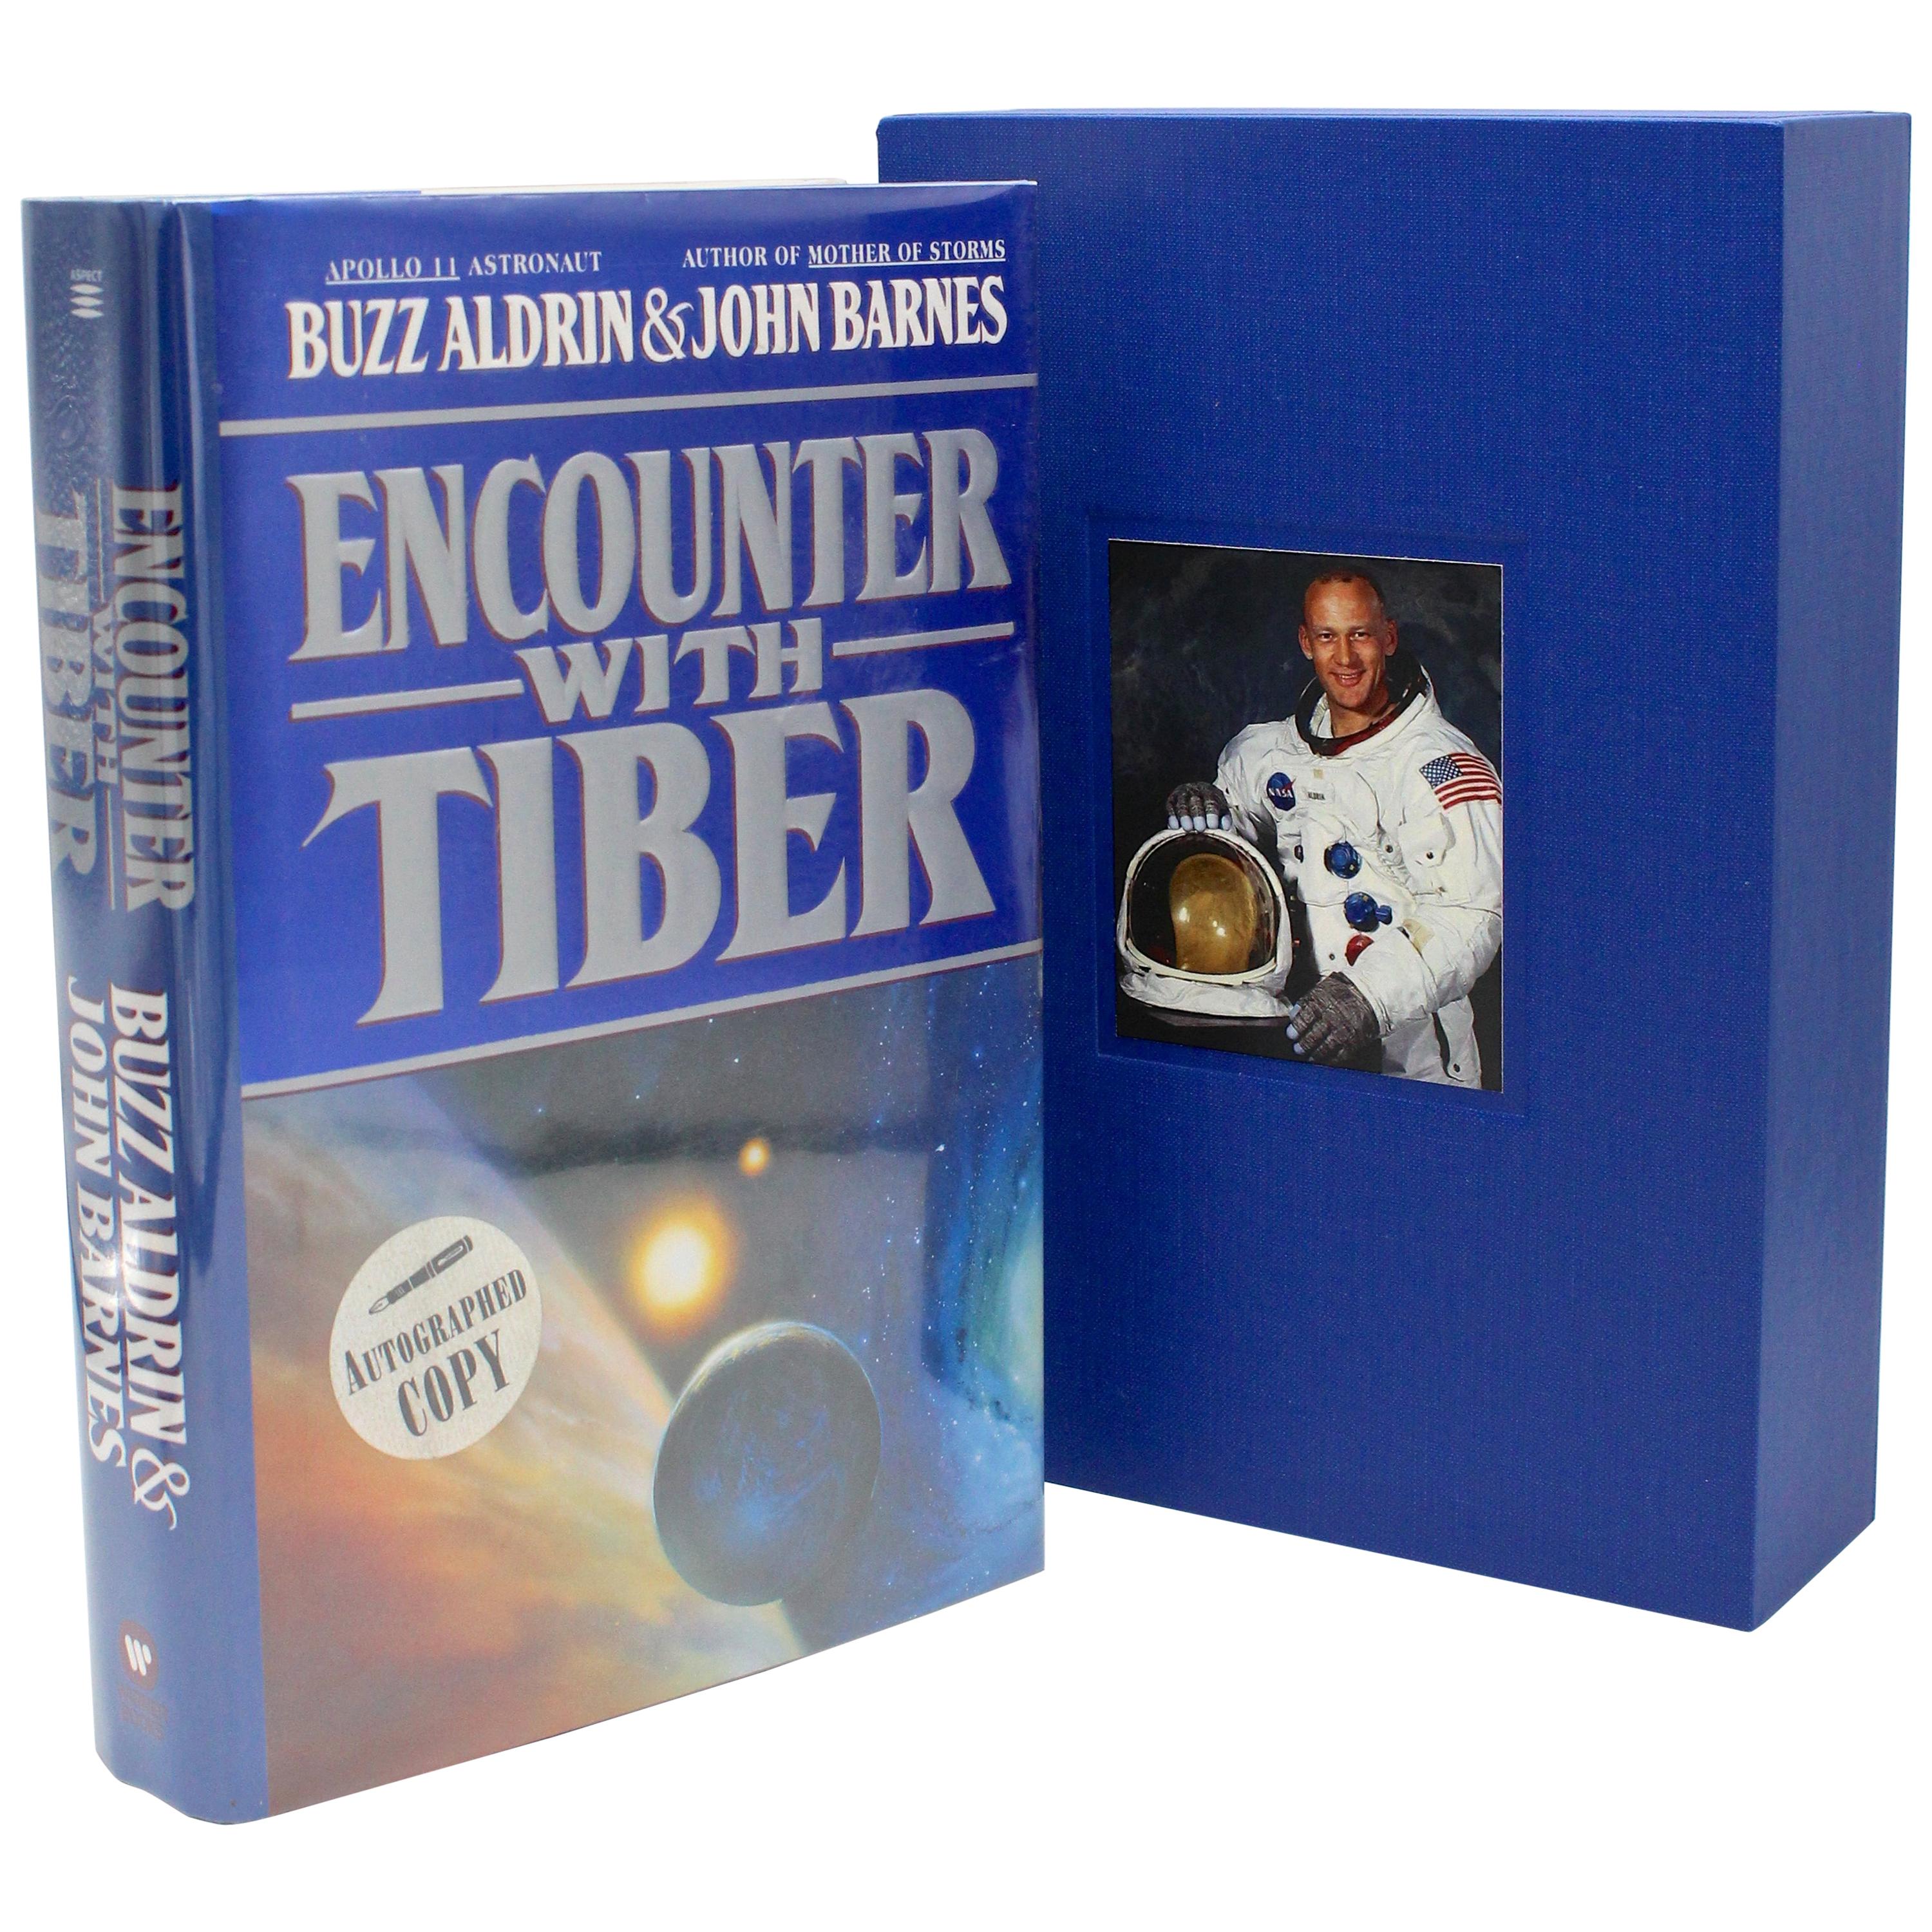 Encounter with Tiber by Buzz Aldrin and John Barnes, Signed First Edition, 1996